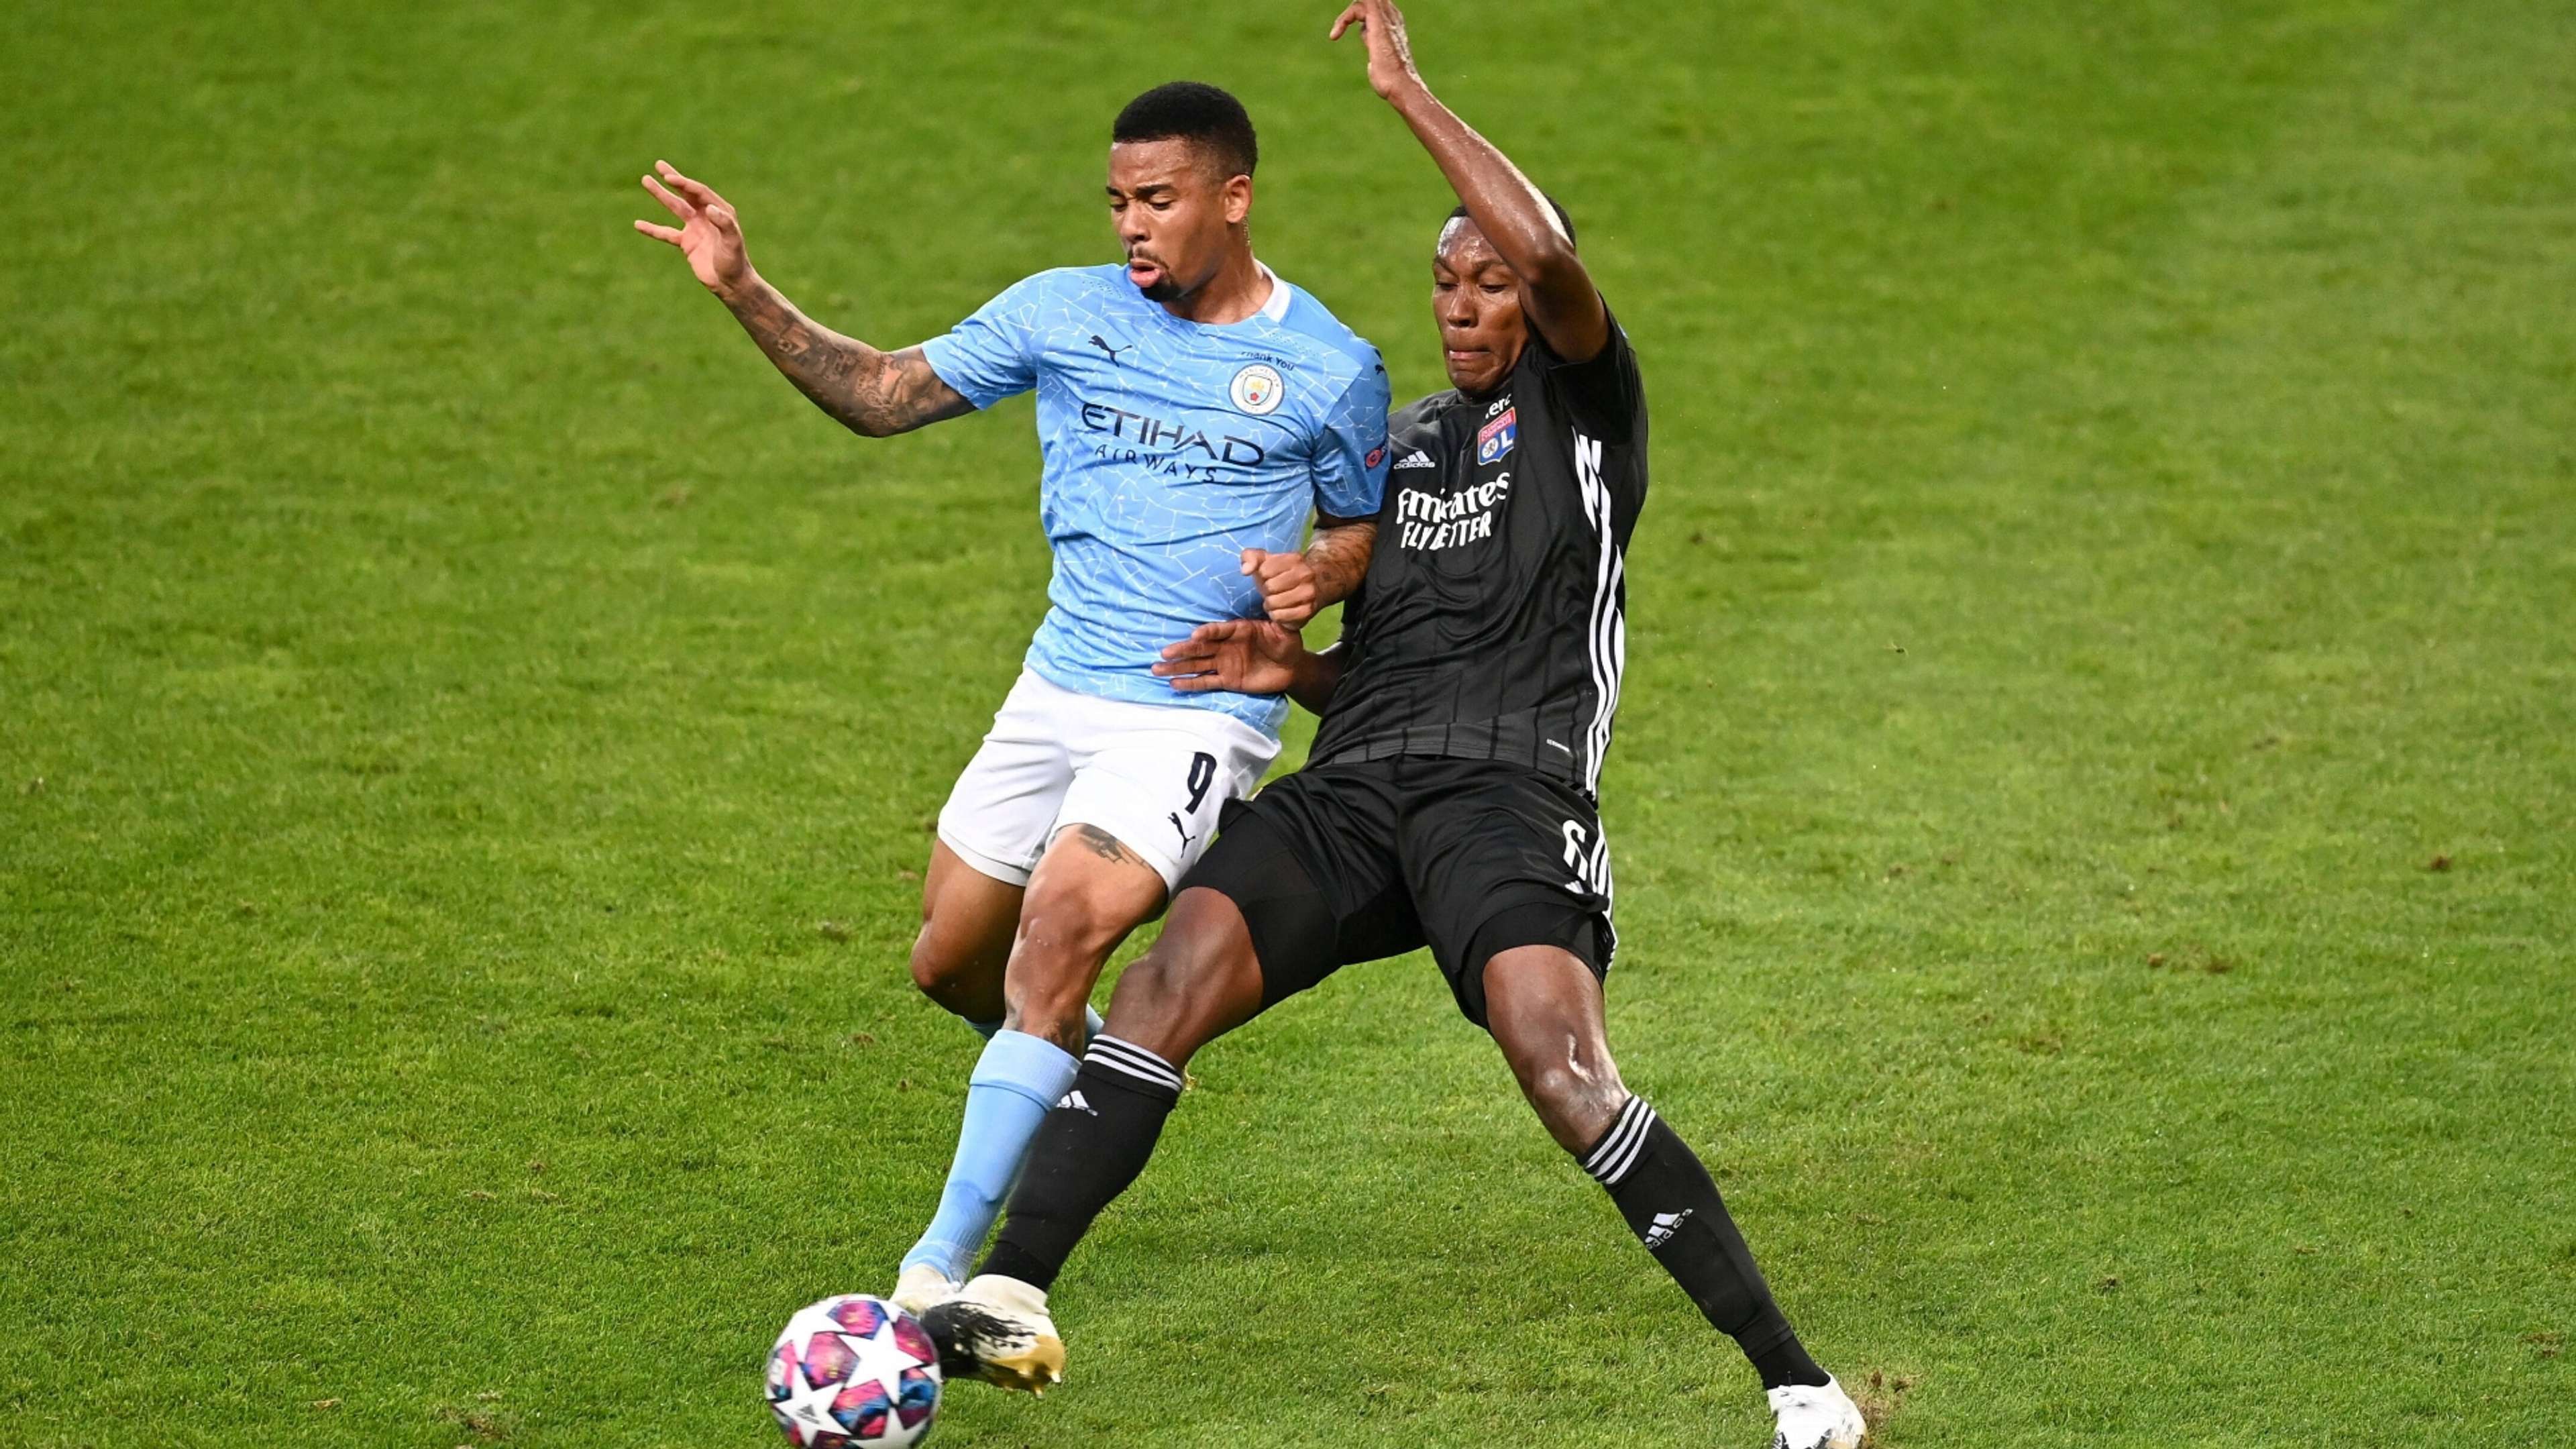 GER ONLY Marcelo Gabriel Jesus Olympique Lyon Manchester City 15-08-2020